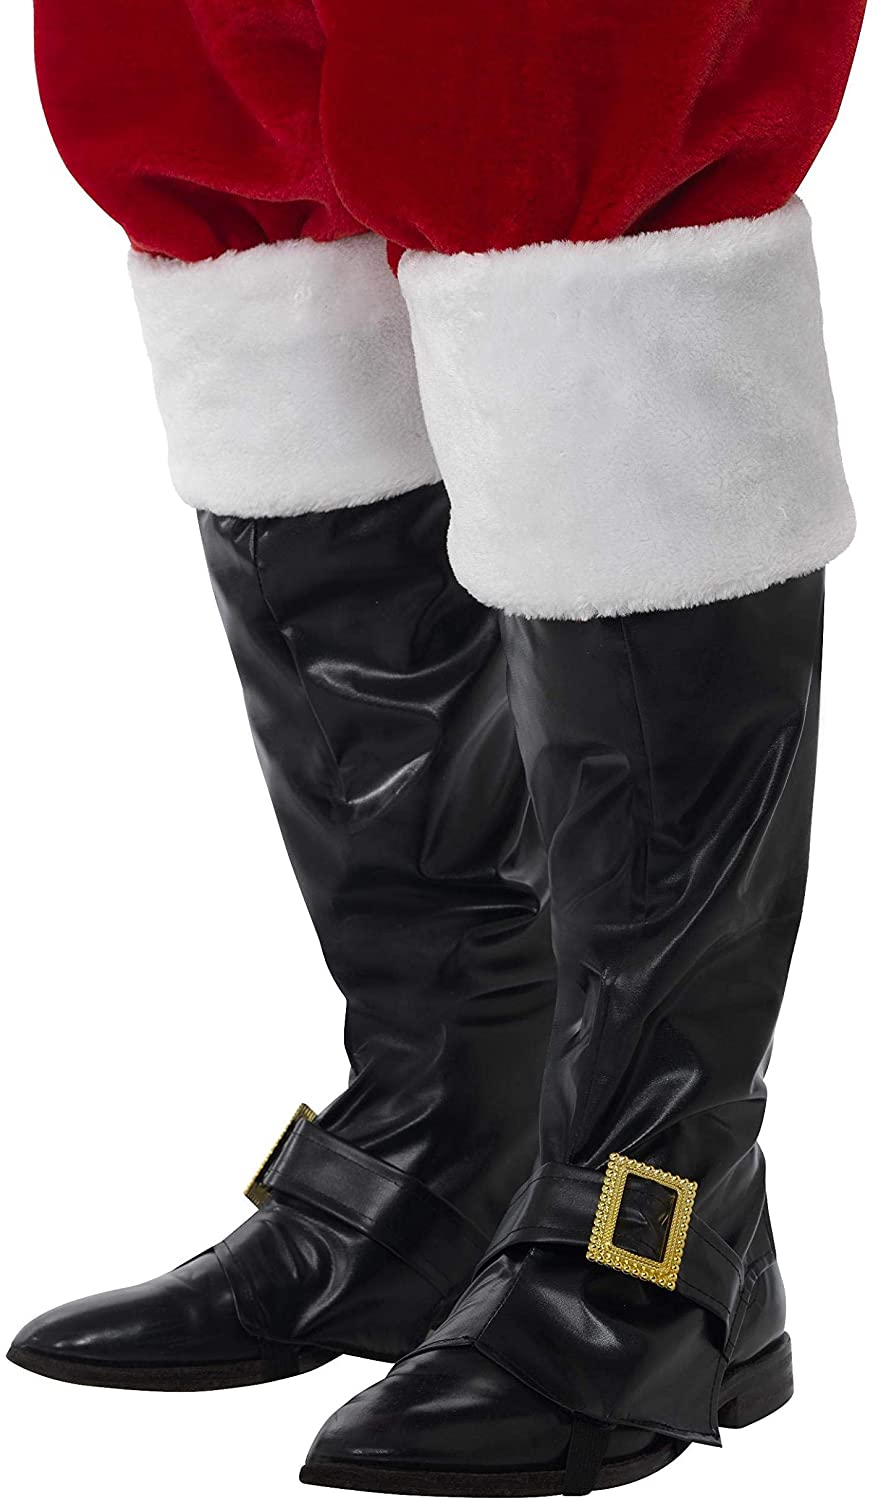 Smiffys 21419 Unisex Santa Boot Cover (One Size)